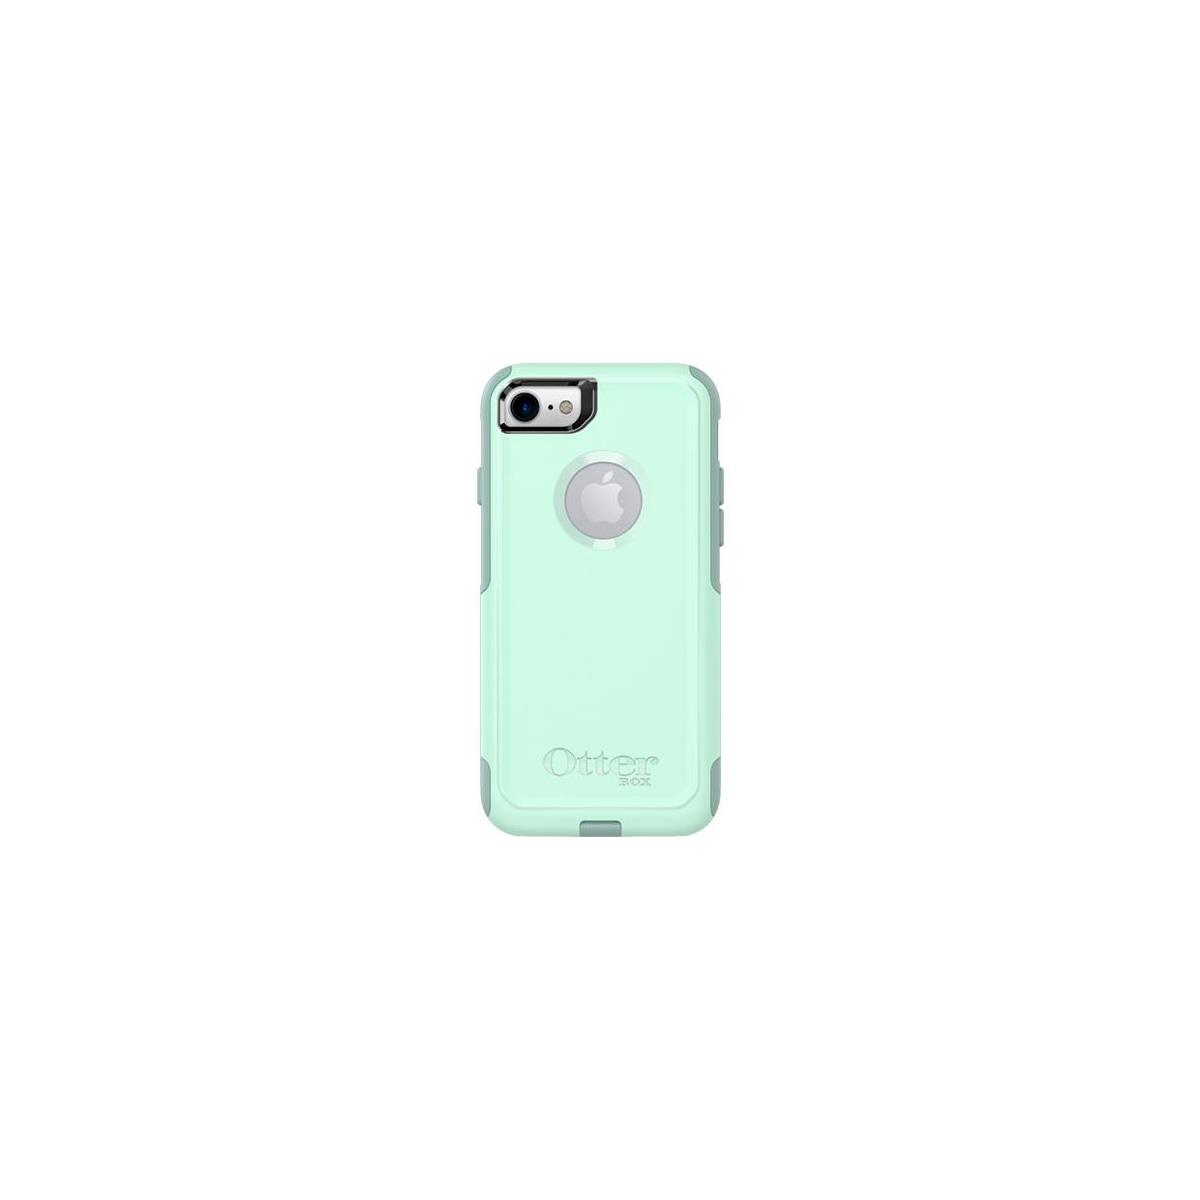 Image of OtterBox Otterbox Commuter Case for iPhone 7/ iPhone 8